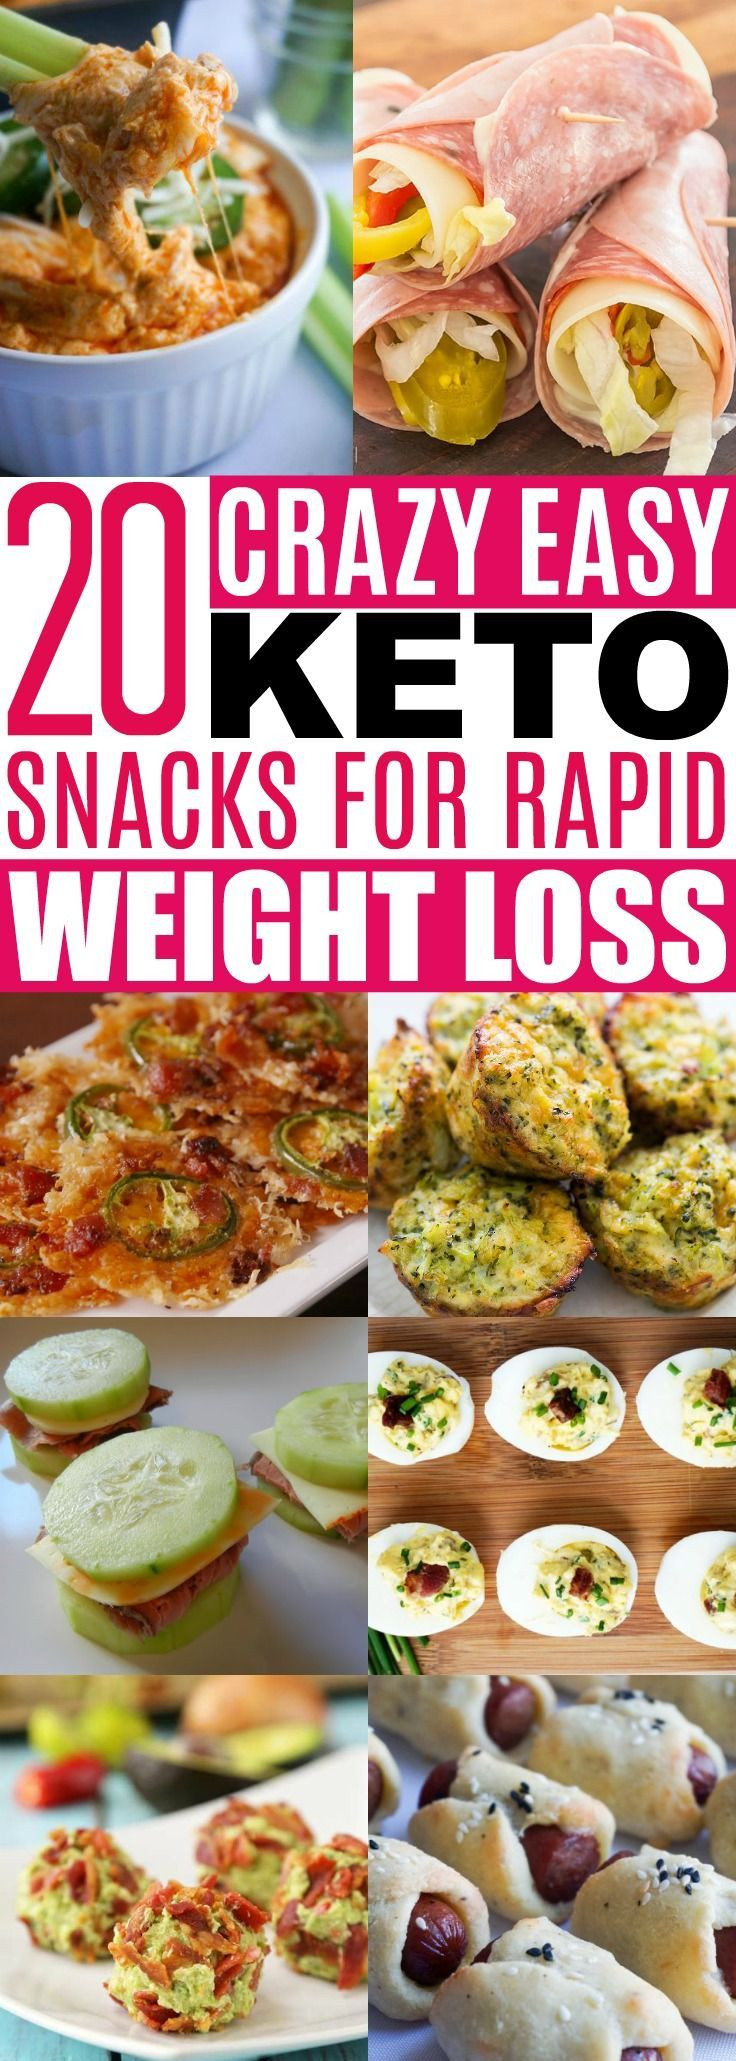 Clean Keto Snacks Easy
 809 best LOW CARB SNACKS KETO LCHF images on Pinterest